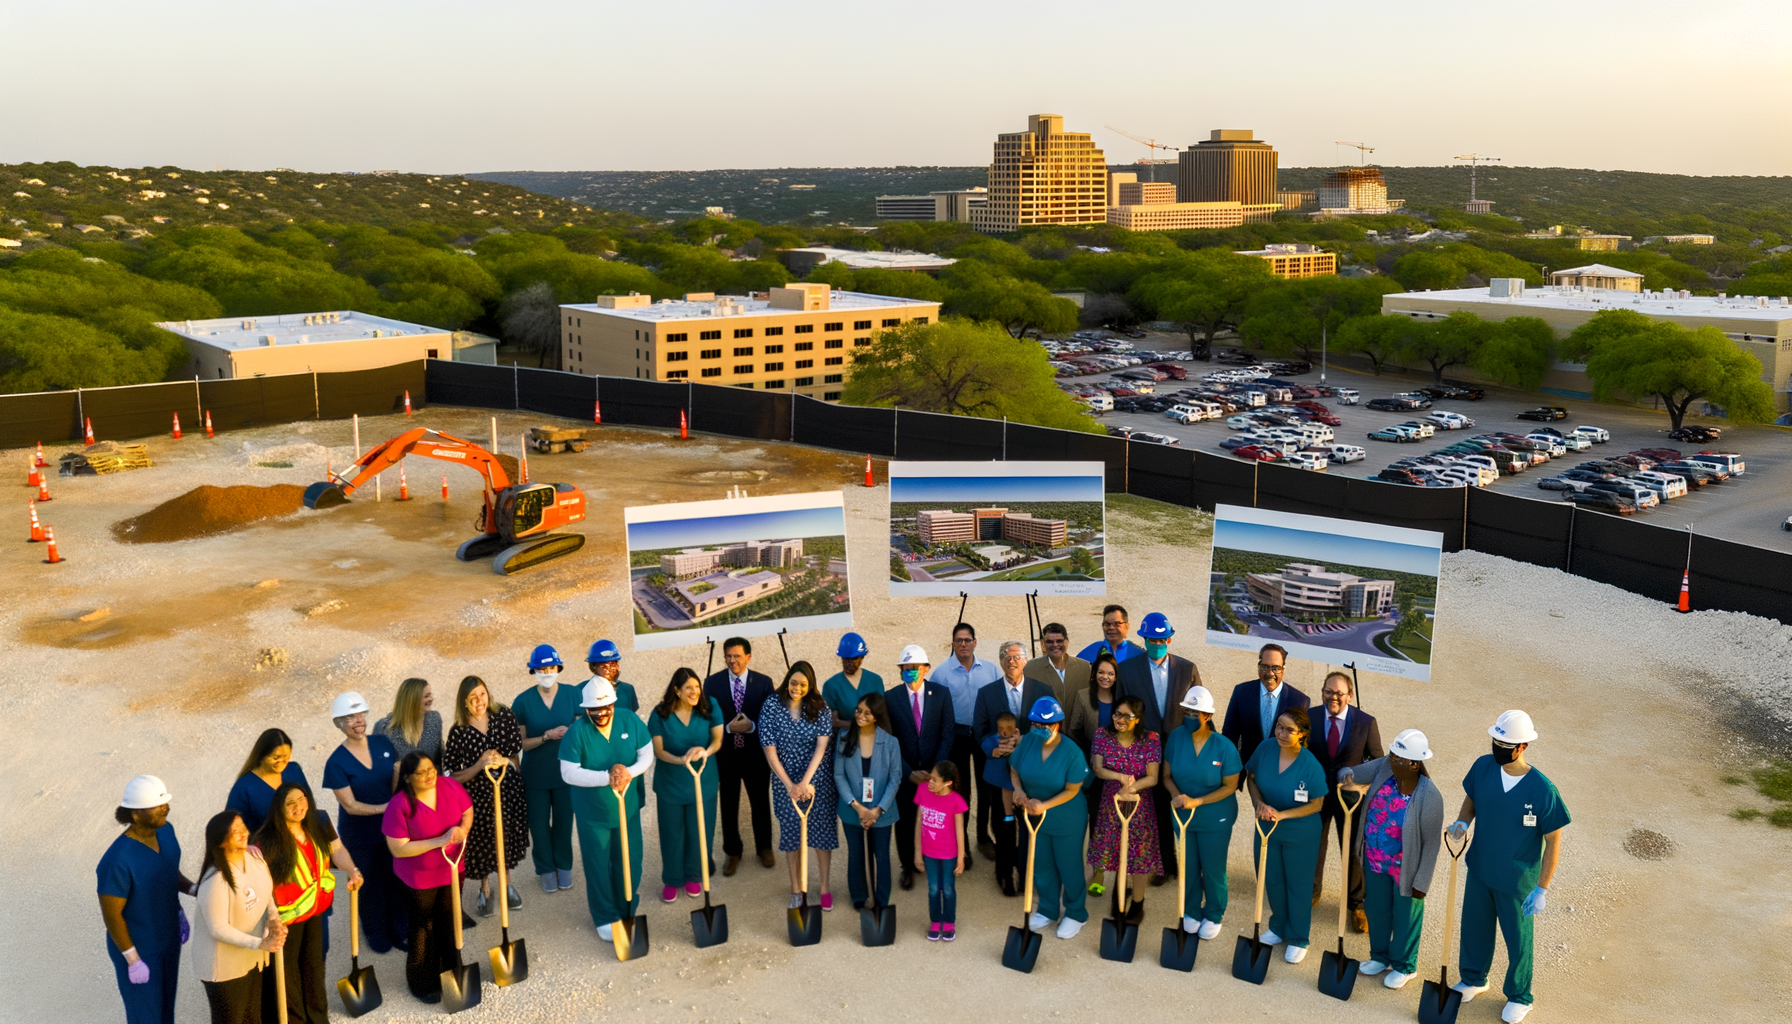 For the hero image of this article, envision a dynamic and visually engaging scene that captures the essence of healthcare innovation and community spirit in Manor, TX. The scene should be set against the backdrop of a vibrant sunrise, symbolizing the dawn of a new era in local healthcare. In the foreground, a group of diverse people from the community, including families, healthcare workers in scrubs, and construction workers with hard hats, are gathered around a large, artistically designed sign that reads, "Future Home of St. David's South Austin Medical Center Emergency Department." They are all smiling and some are holding shovels, ready for a groundbreaking ceremony. The excitement and anticipation in their faces reflect the positive impact the expansion will have on their community. In the immediate background, architectural renderings are displayed on easels, showcasing the modern, state-of-the-art design of the new 1-story emergency center, with key features highlighted, such as the trauma room, CT scan room, and X-ray room. A banner overhead reads, "Bringing Lifesaving Care Closer to Home." The rising sun casts a warm glow over the scene, illuminating the faces of the people and the architectural plans, symbolizing hope and a brighter future for healthcare in Central Texas. The composition should be lively and full of hope, emphasizing the theme of community advancement and the significant benefits the new emergency center will bring to Manor and the surrounding areas. The image should invoke feelings of progress, unity, and reassurance that high-quality emergency healthcare will soon be within reach, changing the game for residents and contributing to the overall wellbeing of the region.